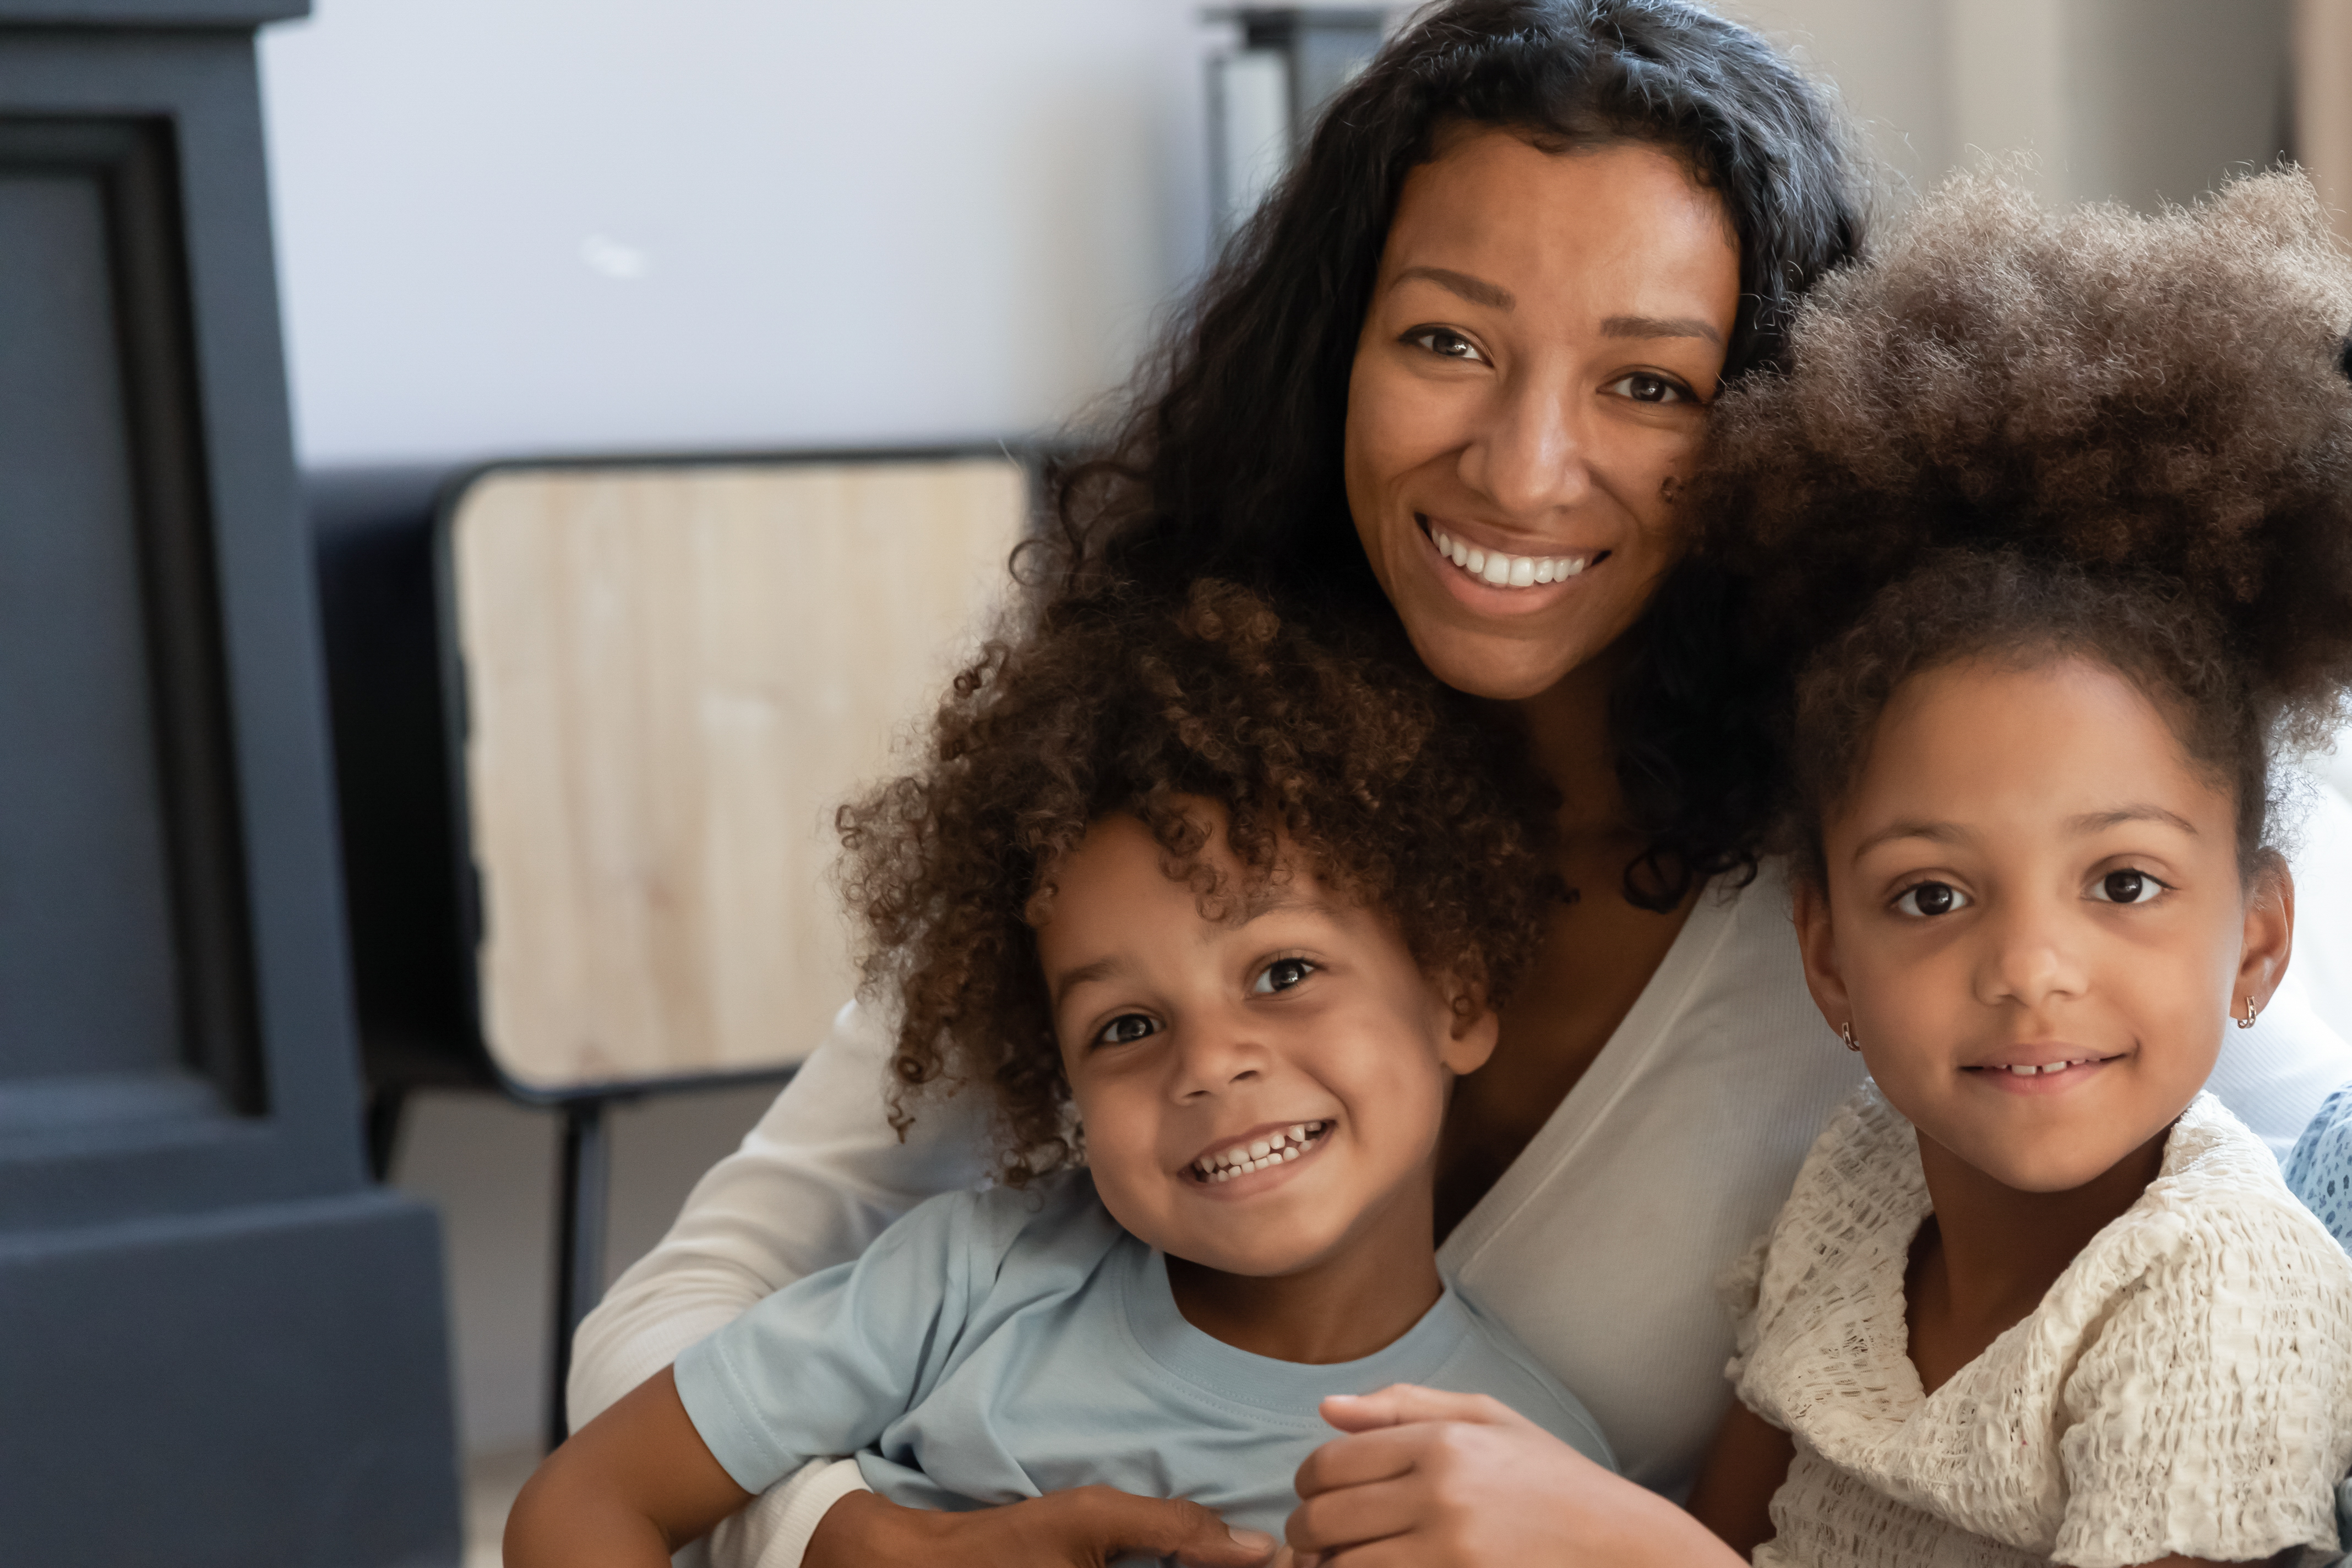 A black woman with two kids | Source: Shutterstock